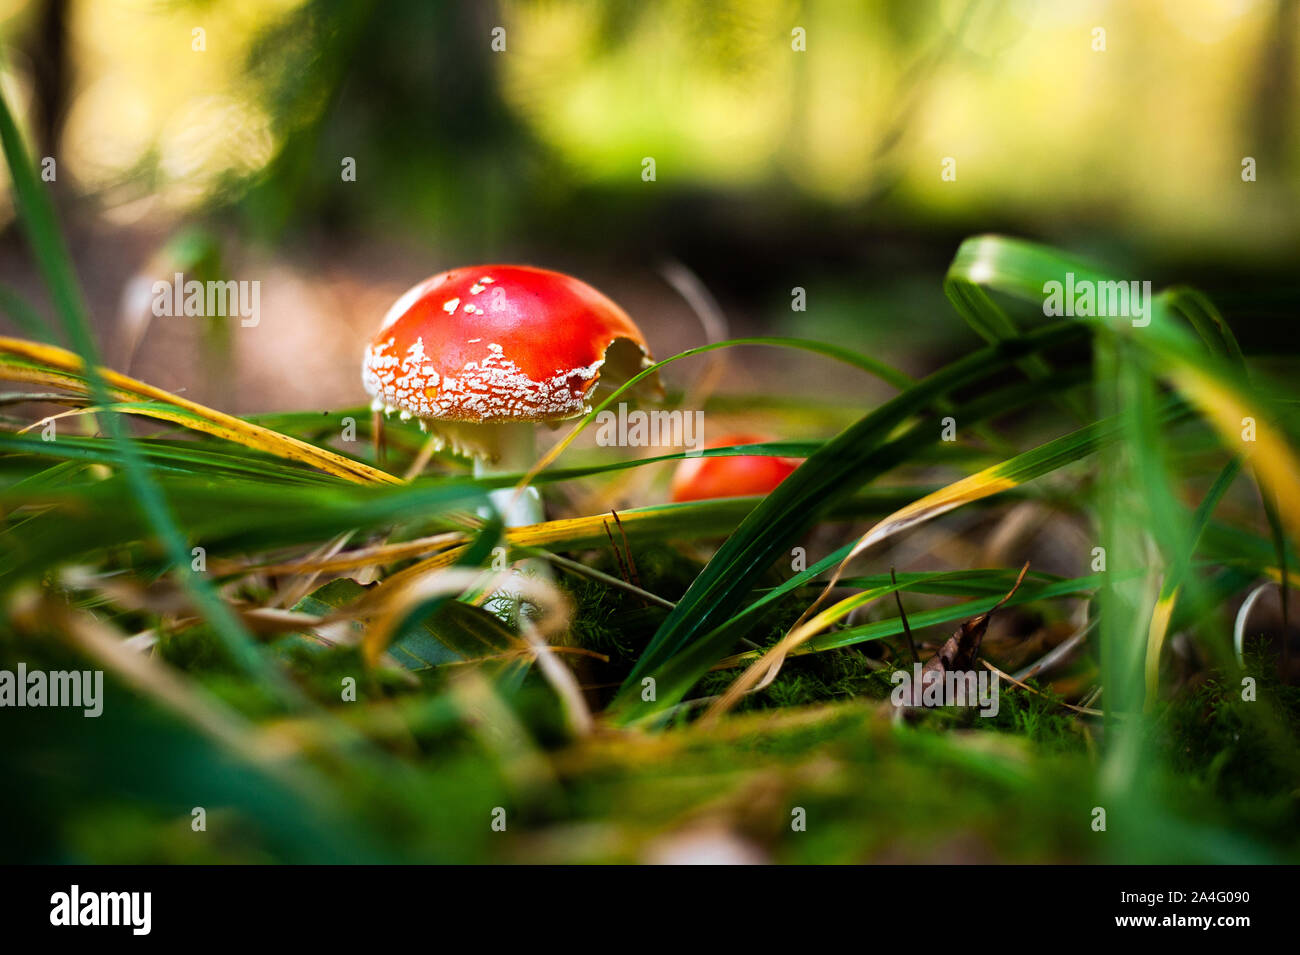 Young fly agaric in grass. Red hallucinogenic poisonous mushroom with white dots. Amanita muscaria. Stock Photo